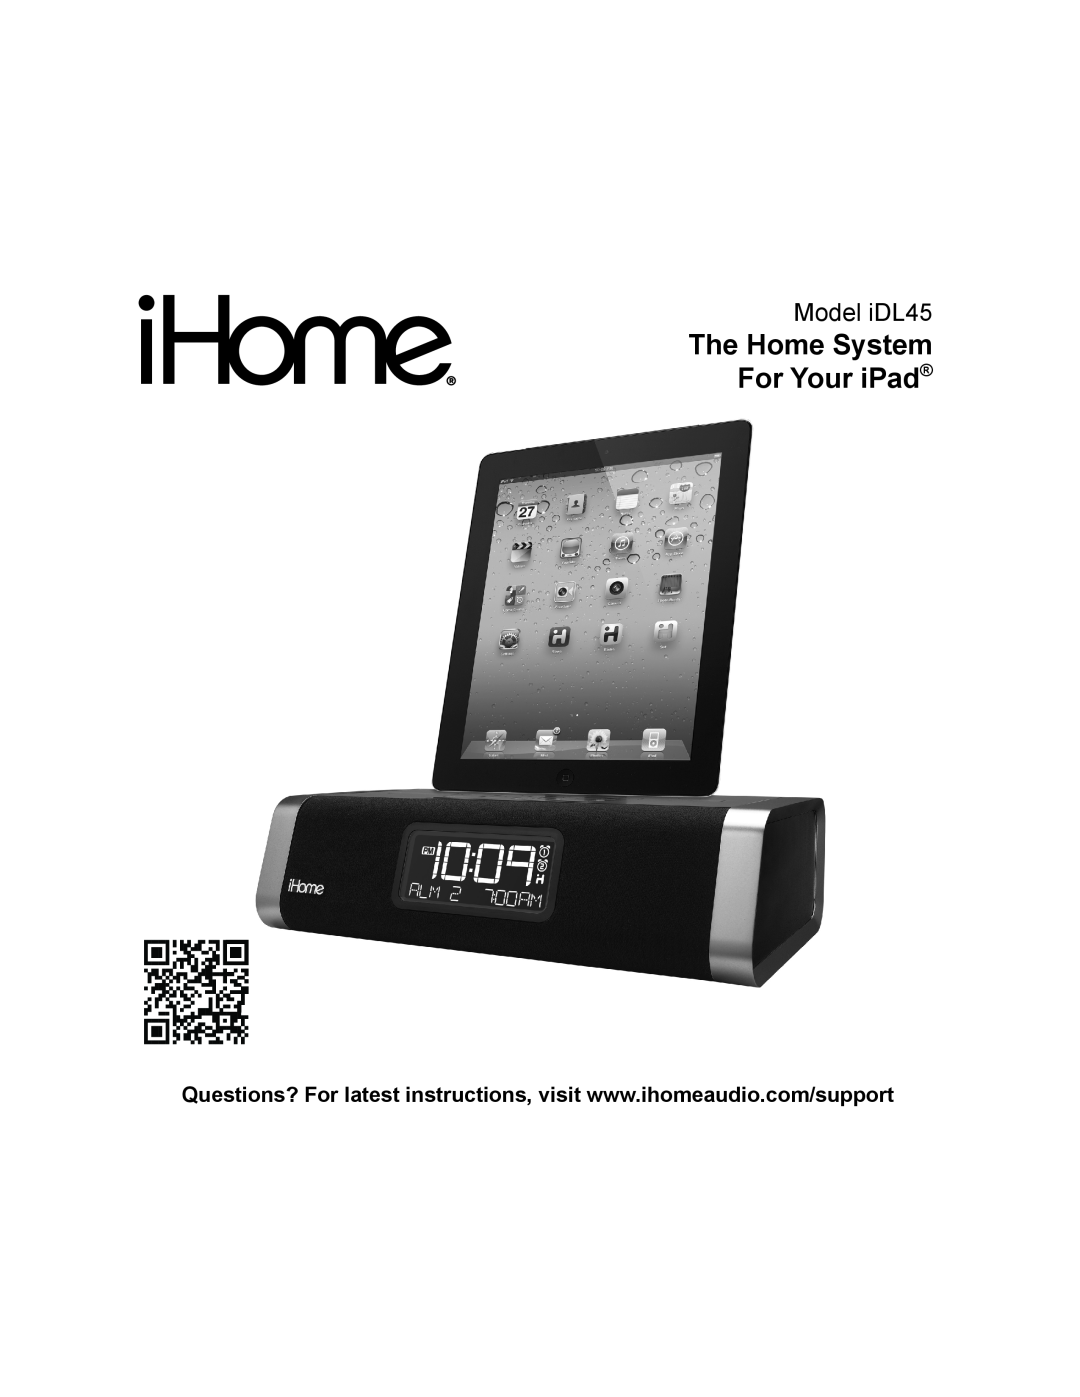 iHome manual The Home System For Your iPad, Model iDL45 